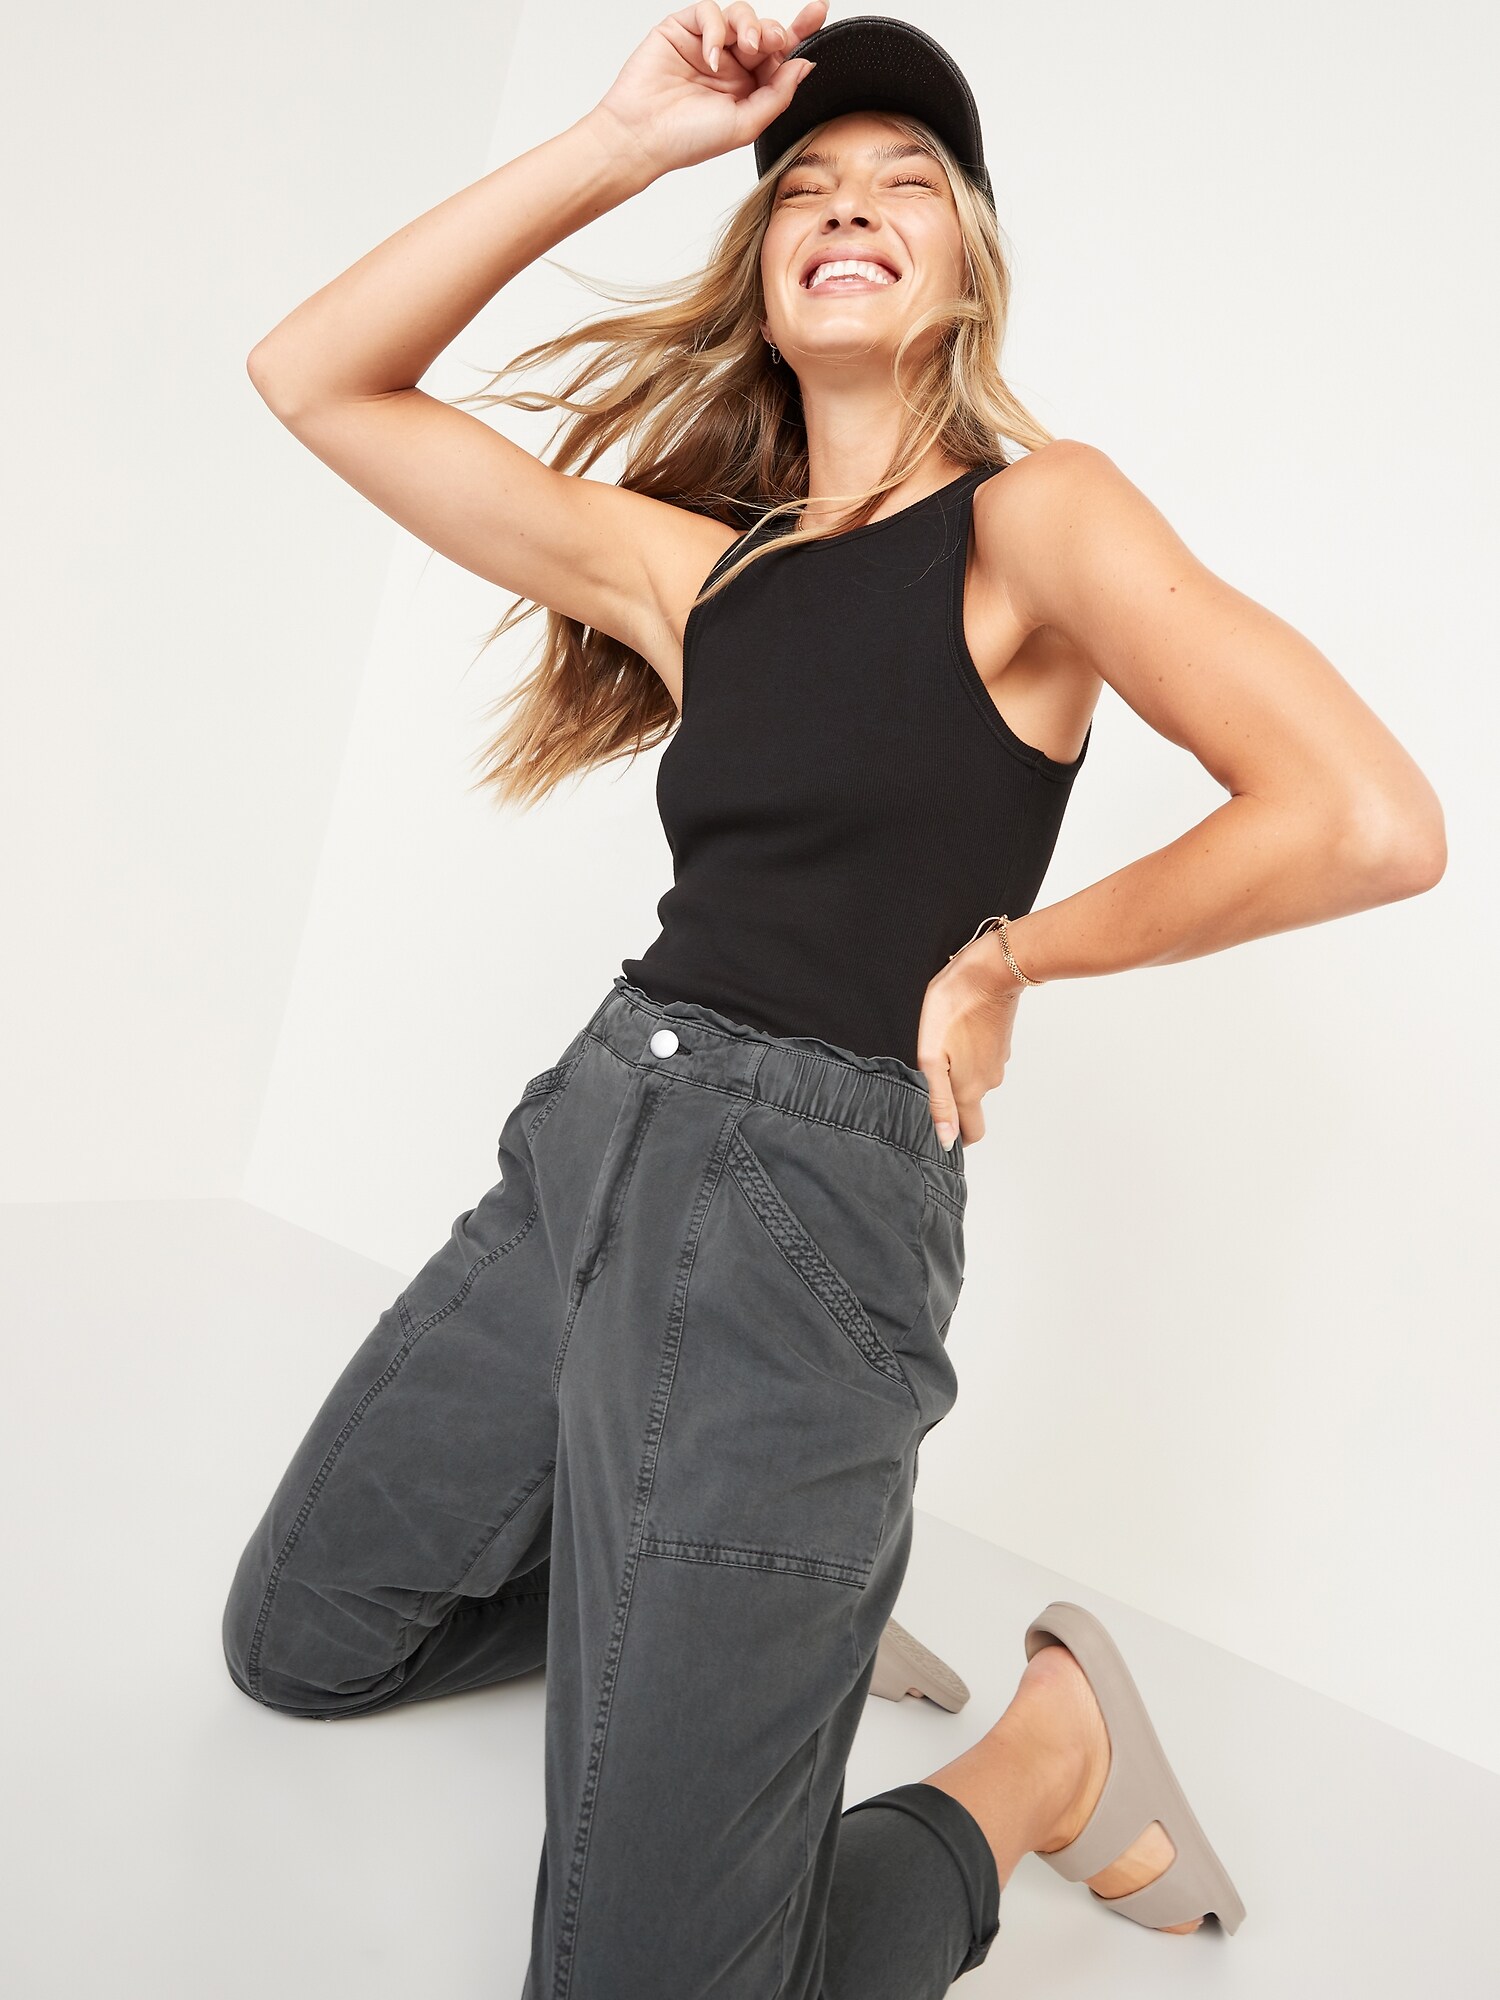 High-Waisted Garment-Dyed Street Jogger Pants for Women, Old Navy